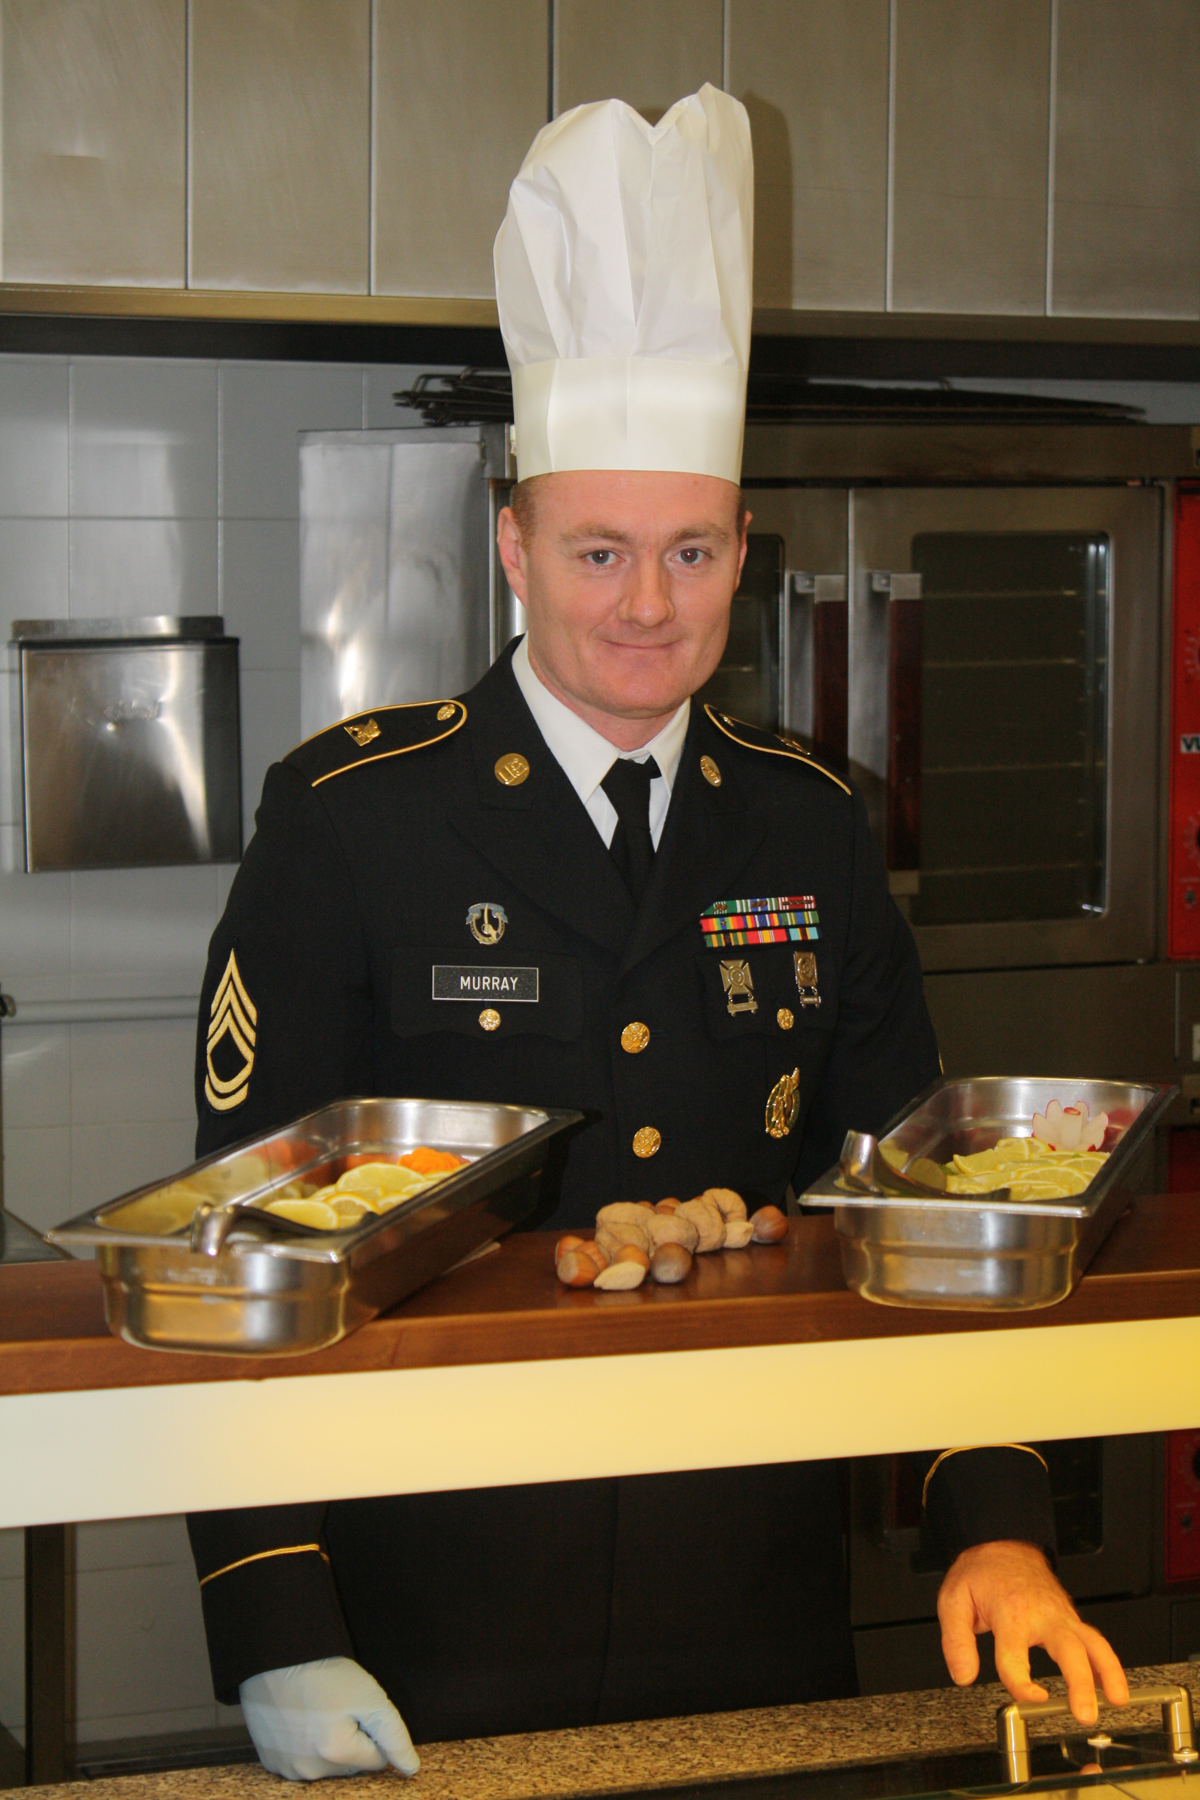 a man in a uniform at a counter with food in bowls